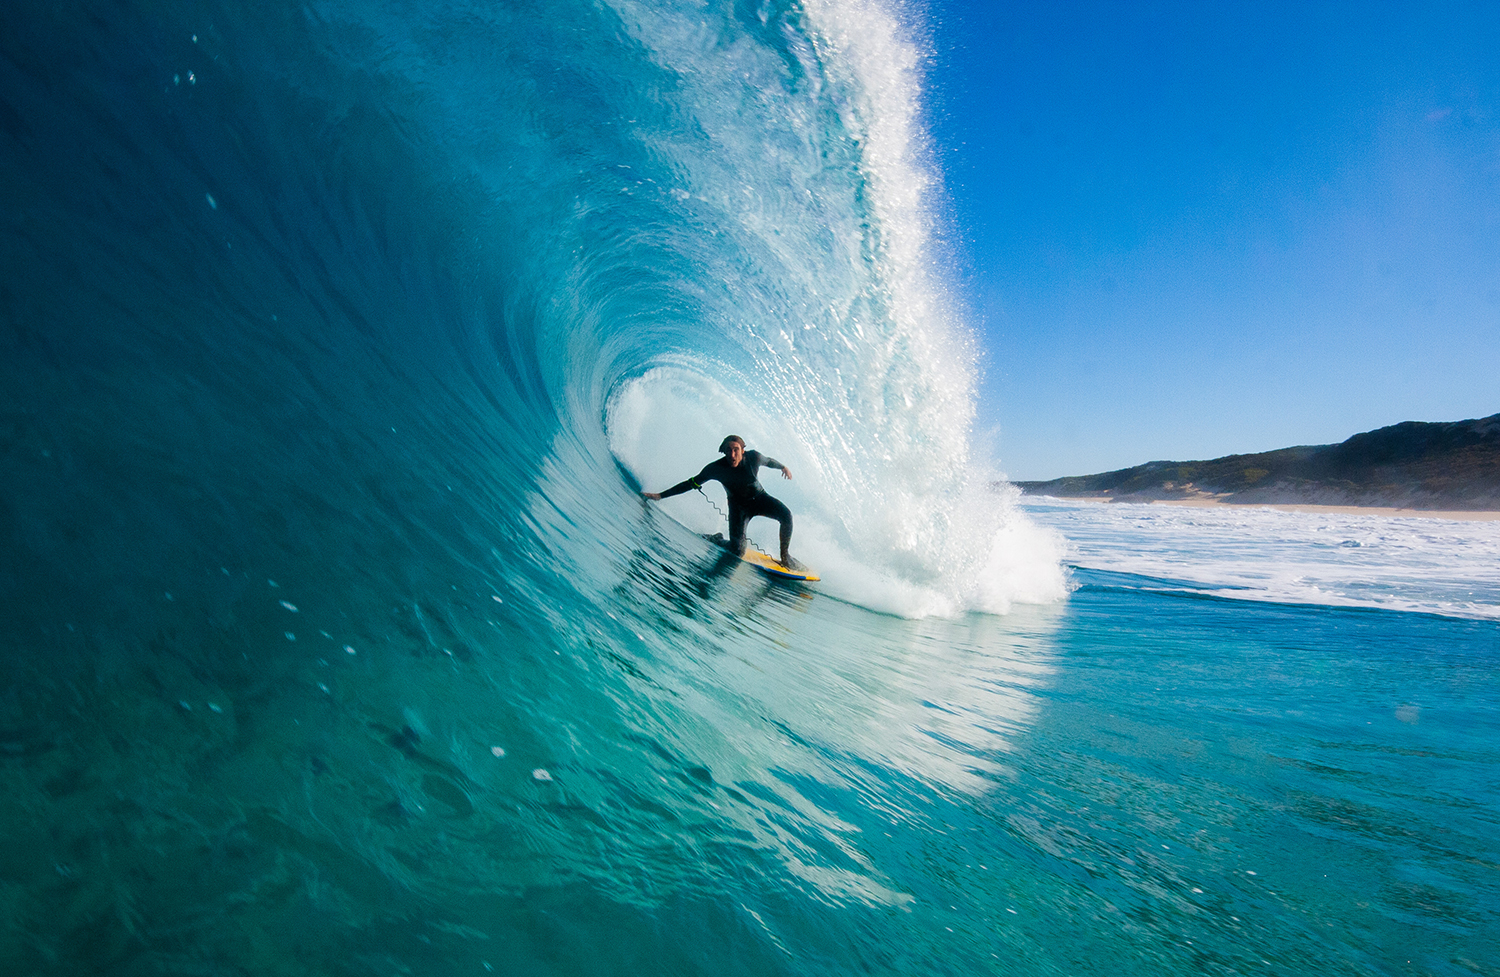 How to do an alley-oop in surfing